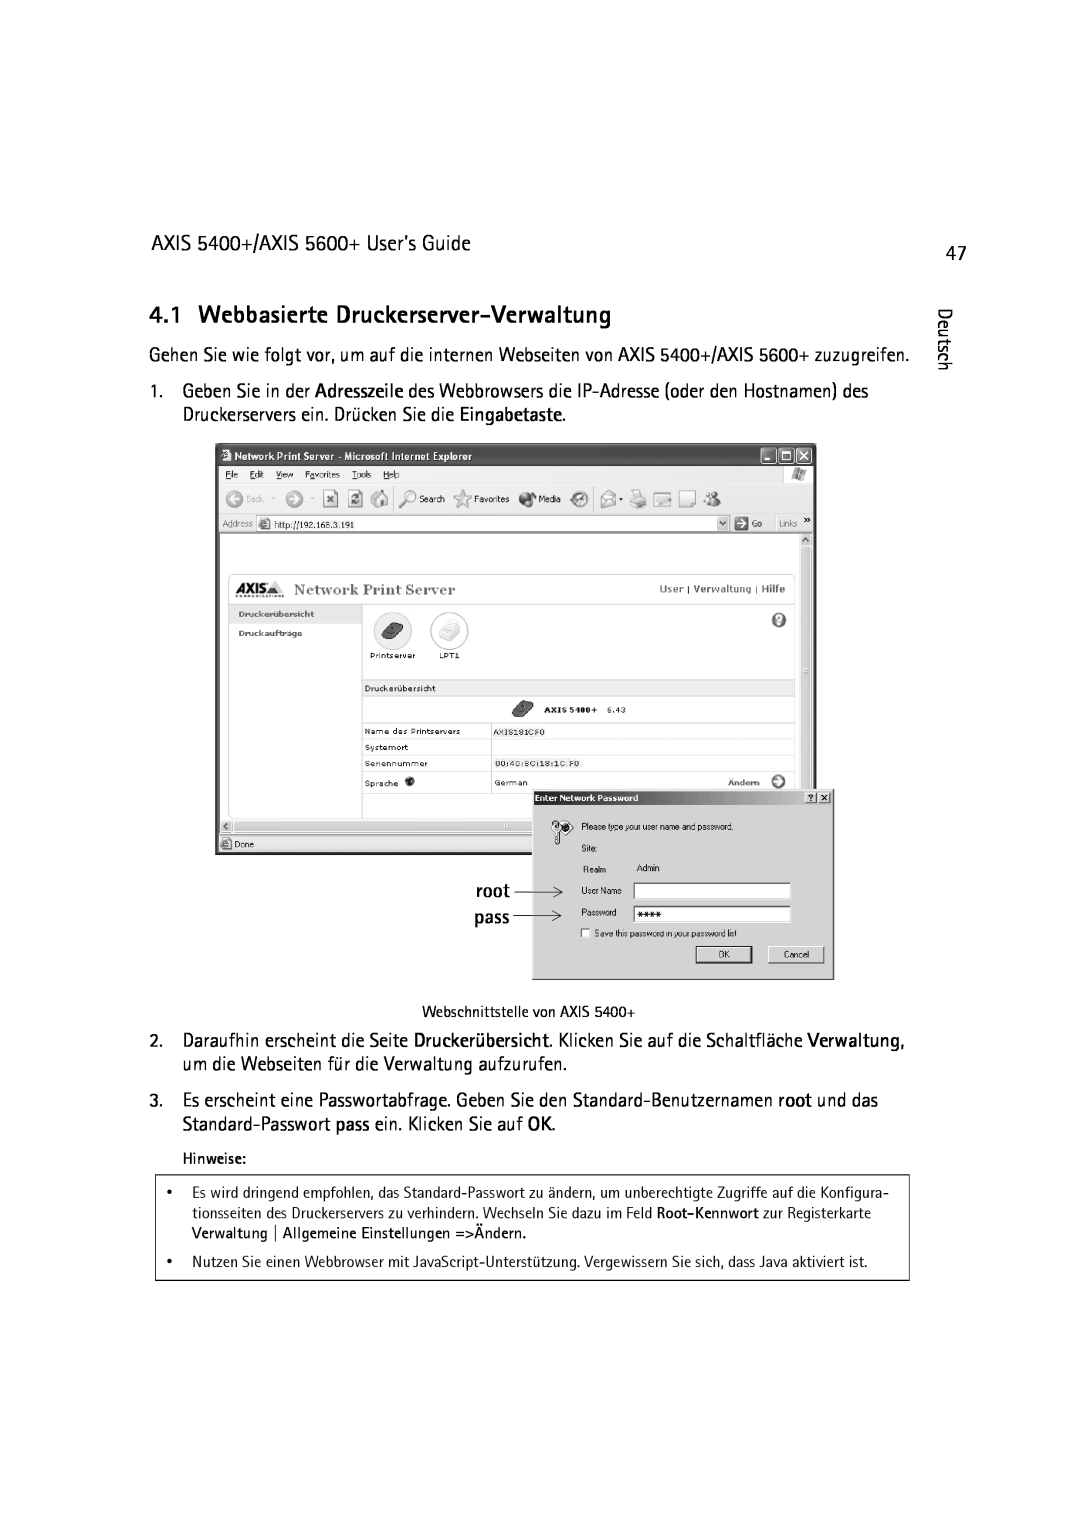 Dell manual Webbasierte Druckerserver-Verwaltung, root pass, AXIS 5400+/AXIS 5600+ User’s Guide 